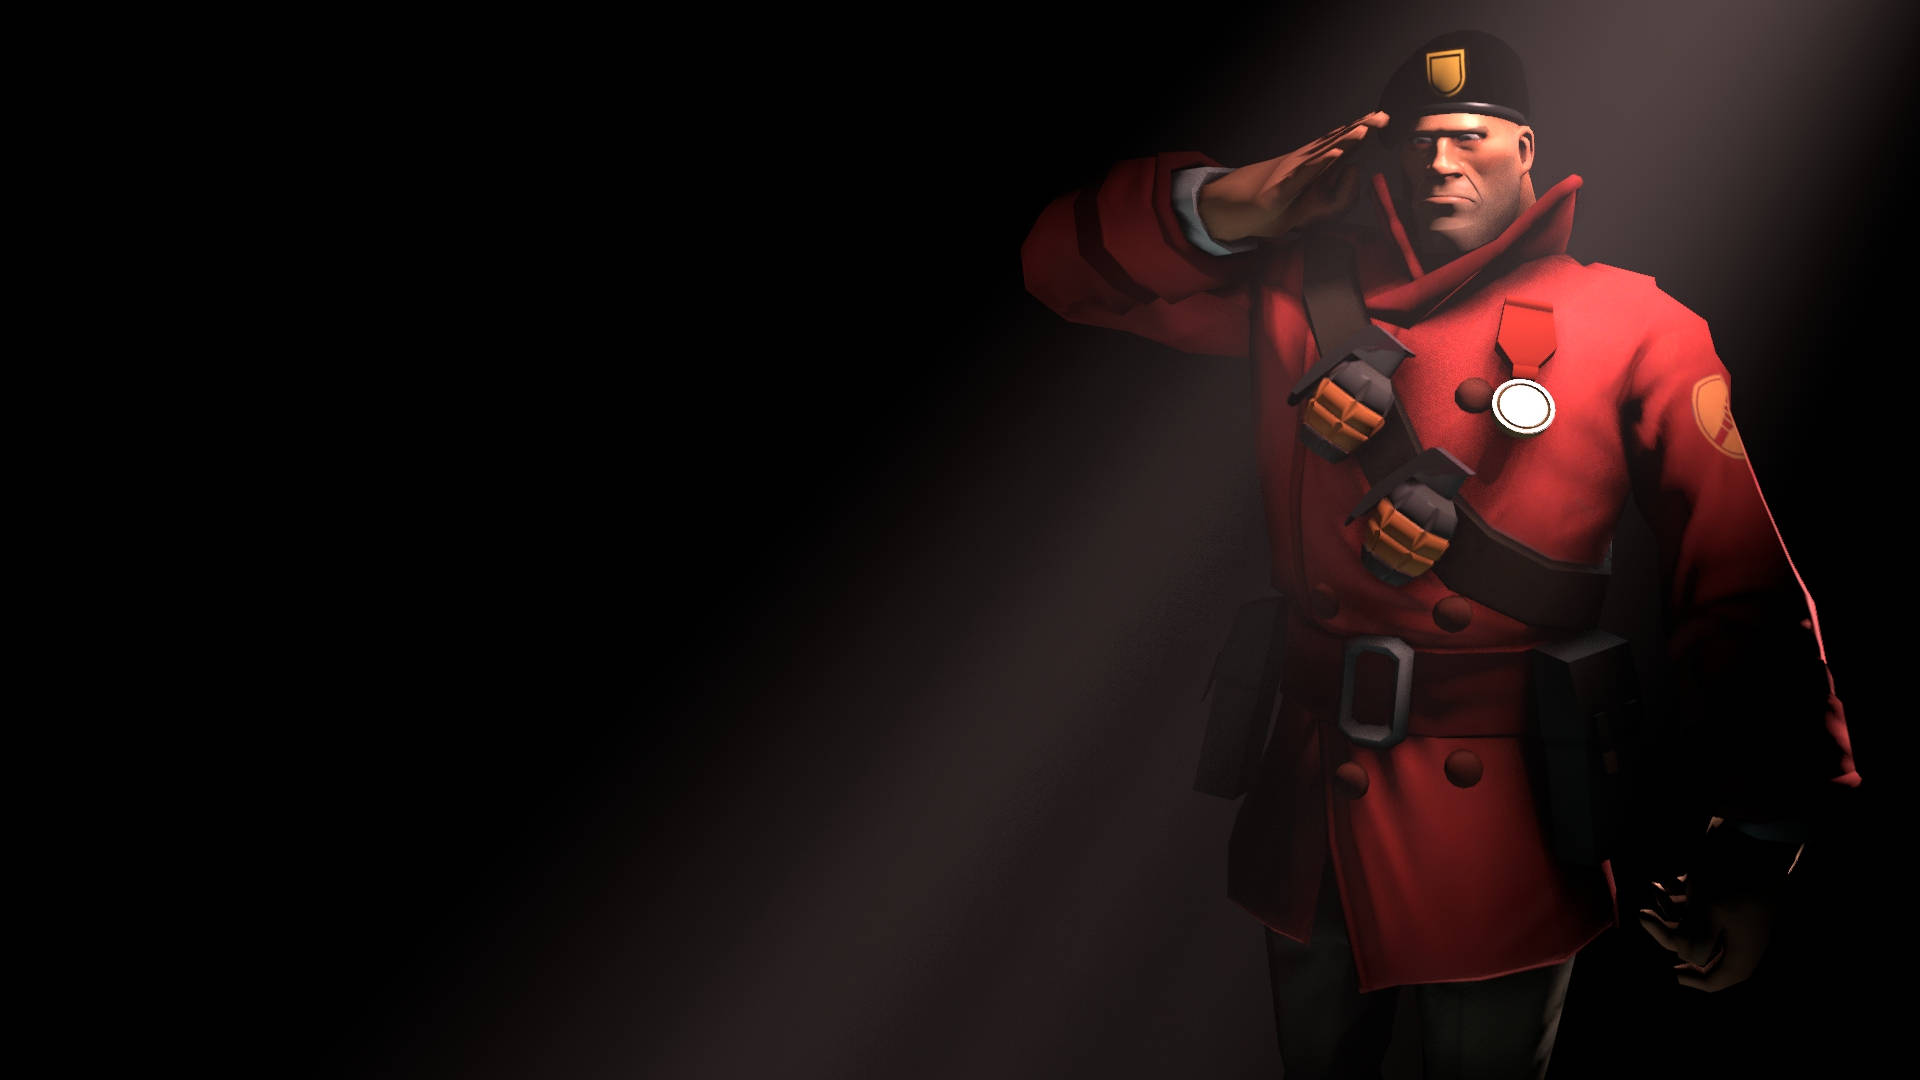 TF2 Soldier Video Game Wallpaper